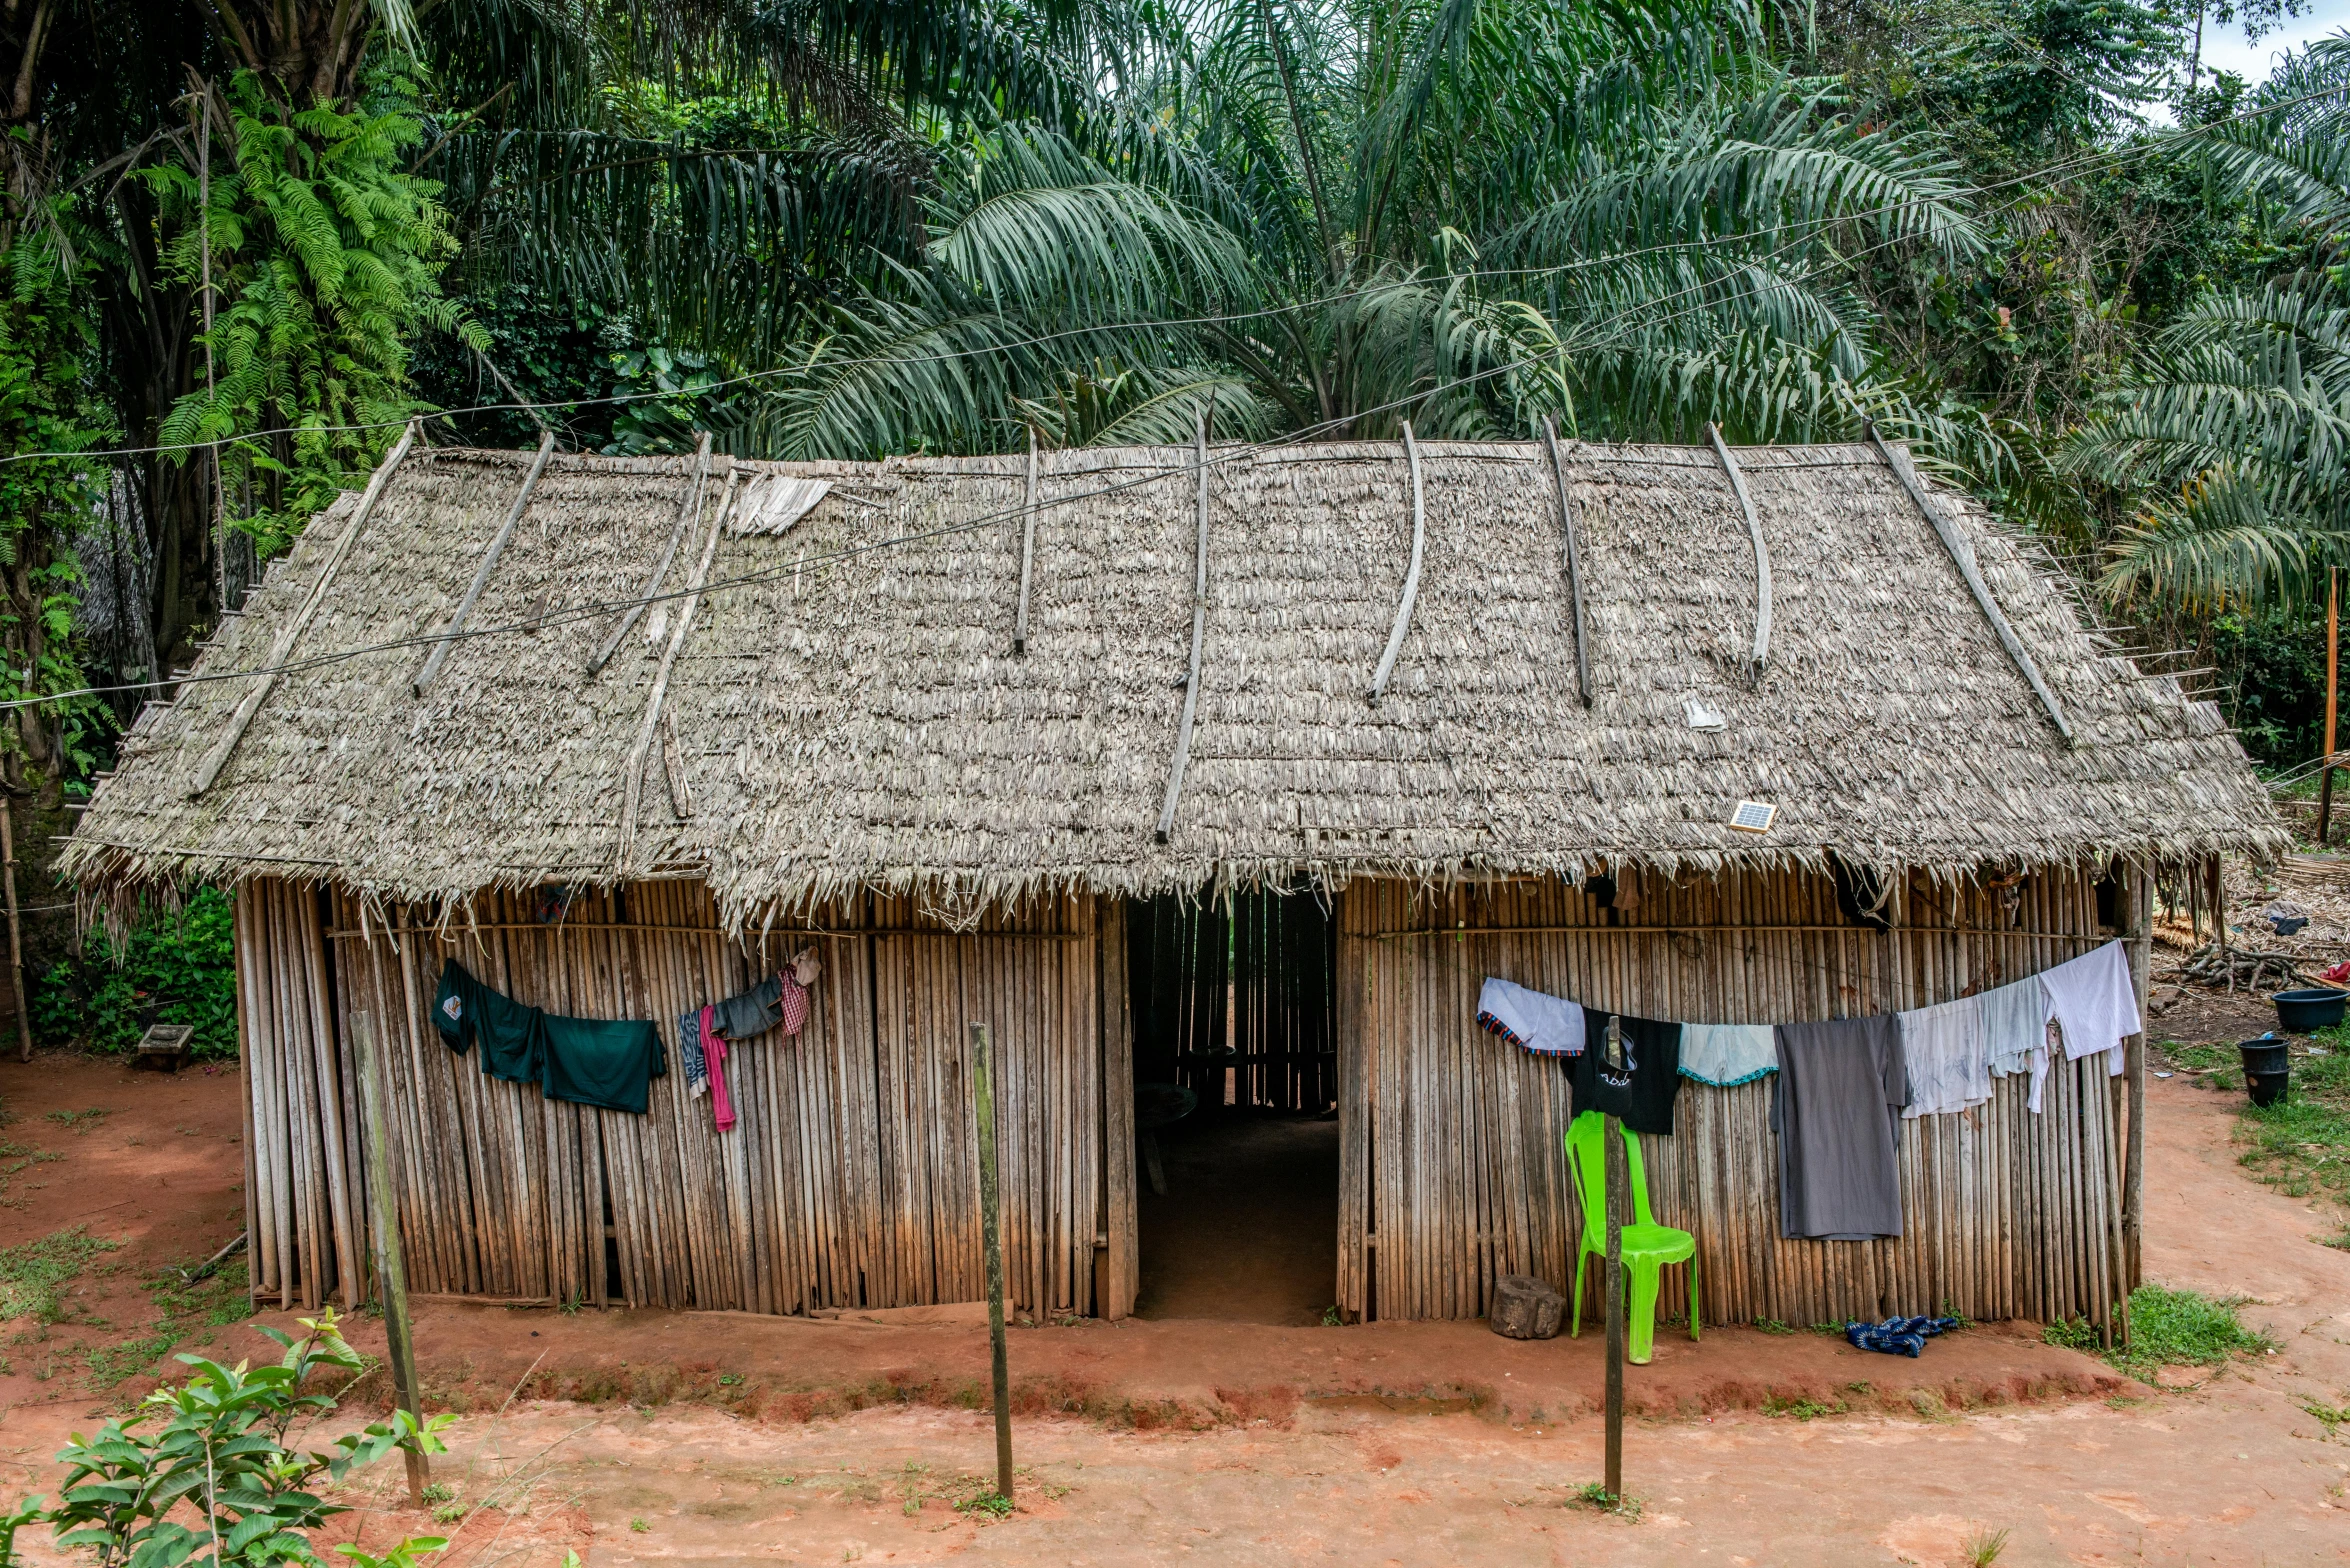 a hut on dirt ground with trees in the background